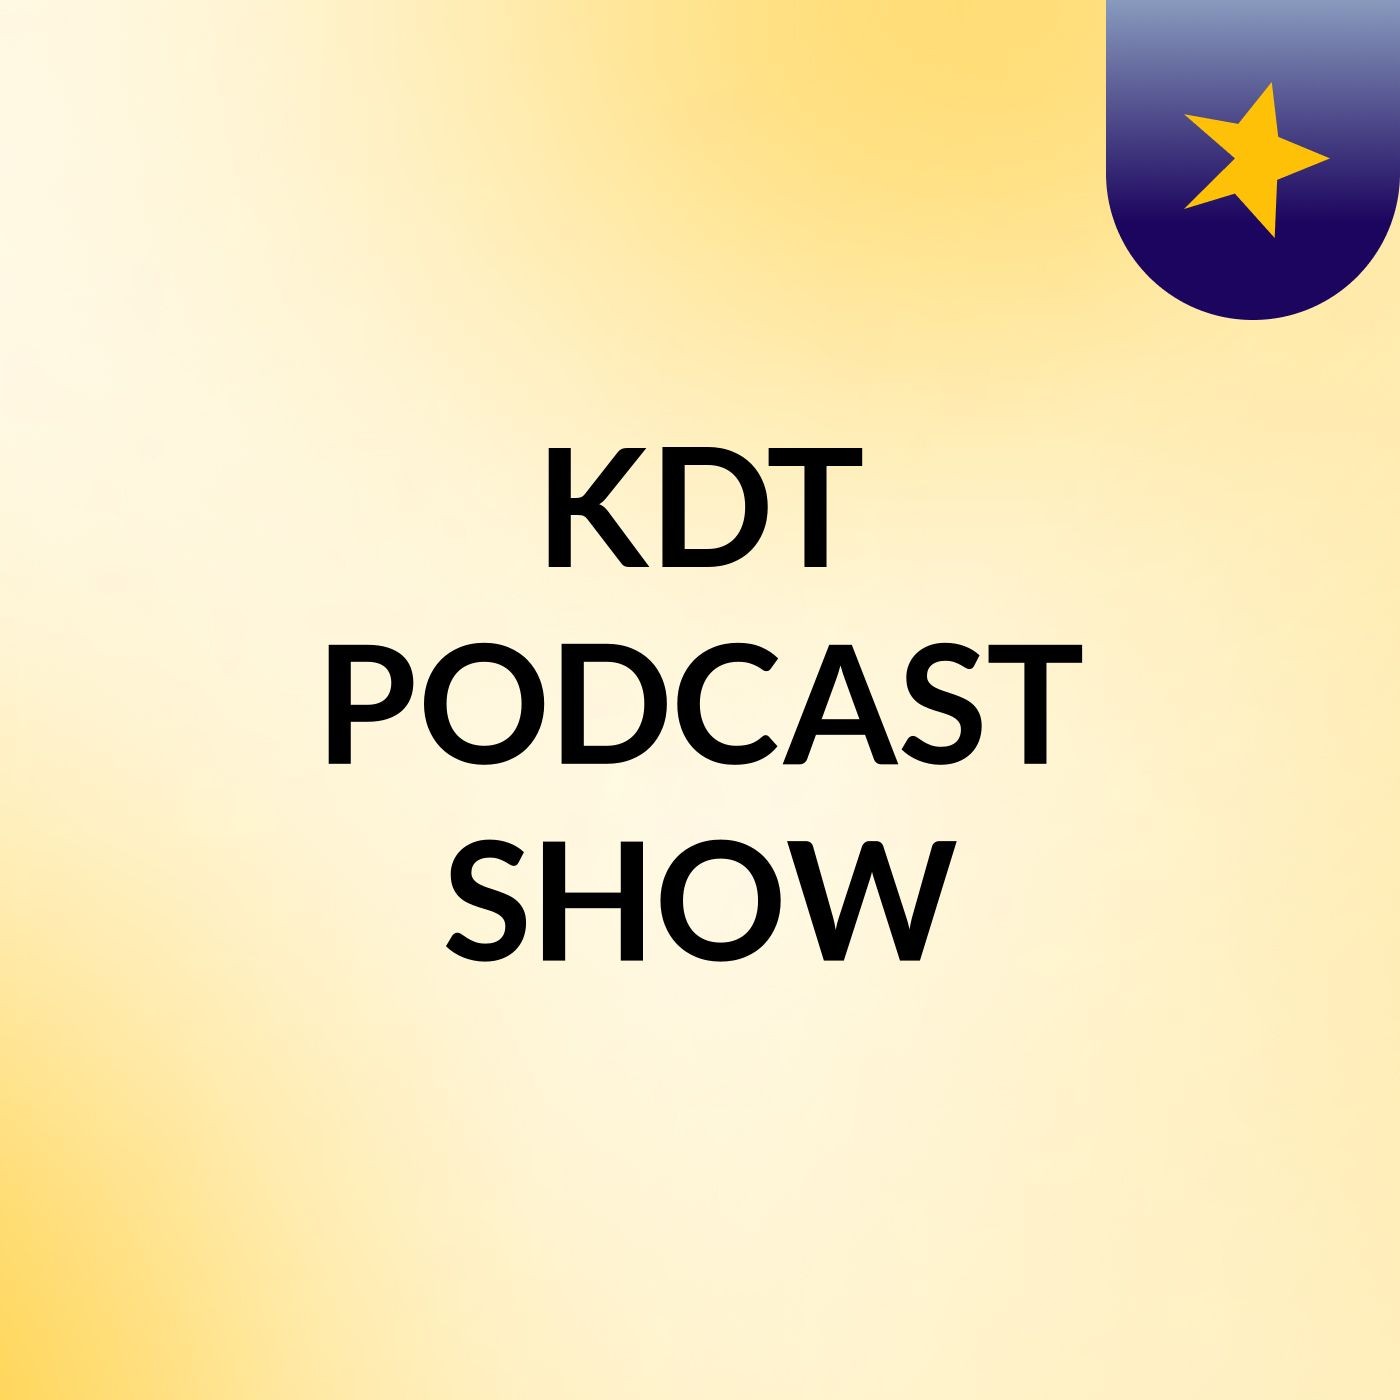 Episode 3 - KDT PODCAST SHOW FIRST FREESTYLE